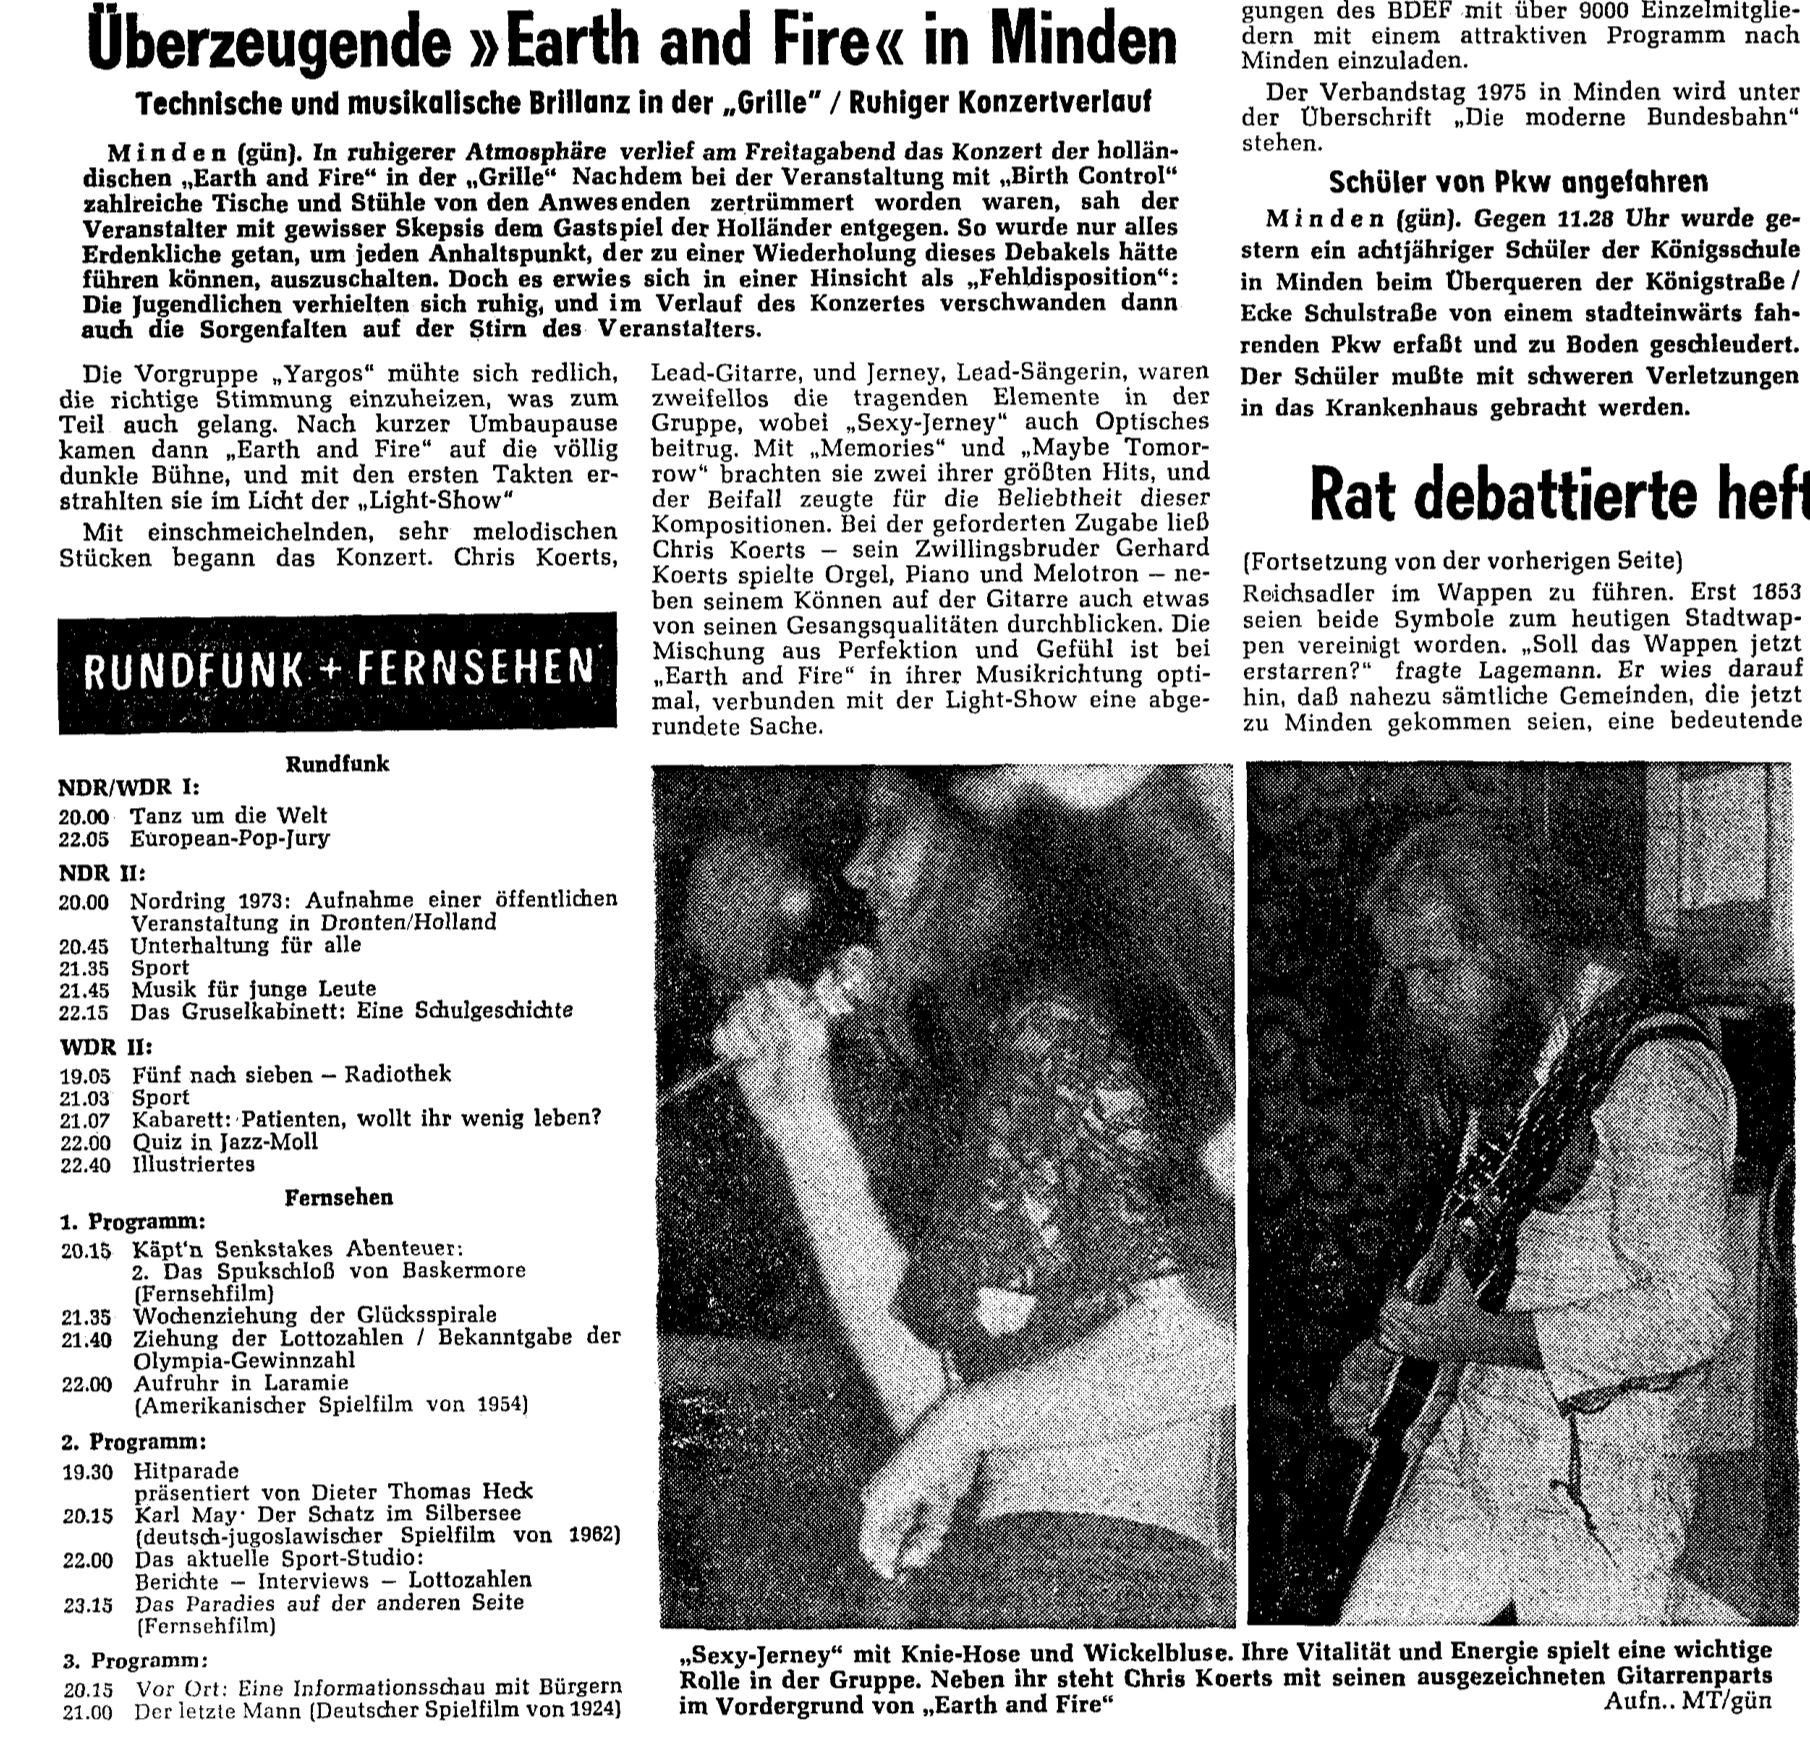 EarthAndFire1974-03-21GrilleMindenWestGermany (1).png